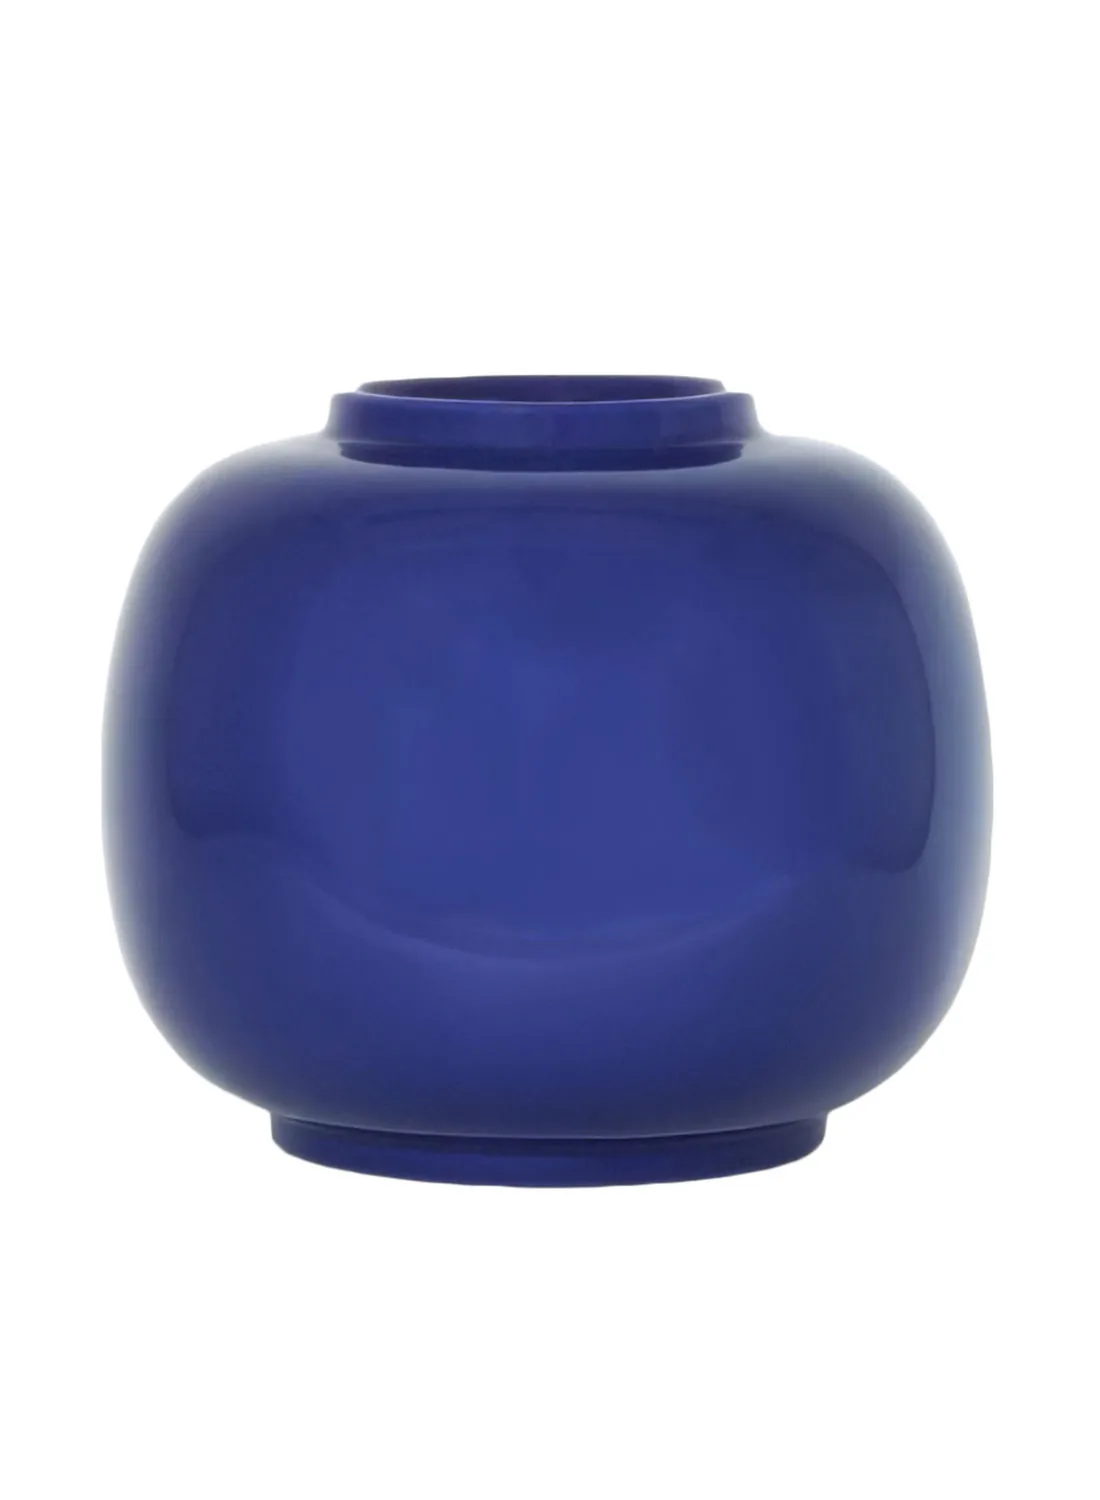 ebb & flow Classic Artistic Shape Ceramic Vase Unique Luxury Quality Material For The Perfect Stylish Home N13-011 Blue 26.5 x 23.5cm